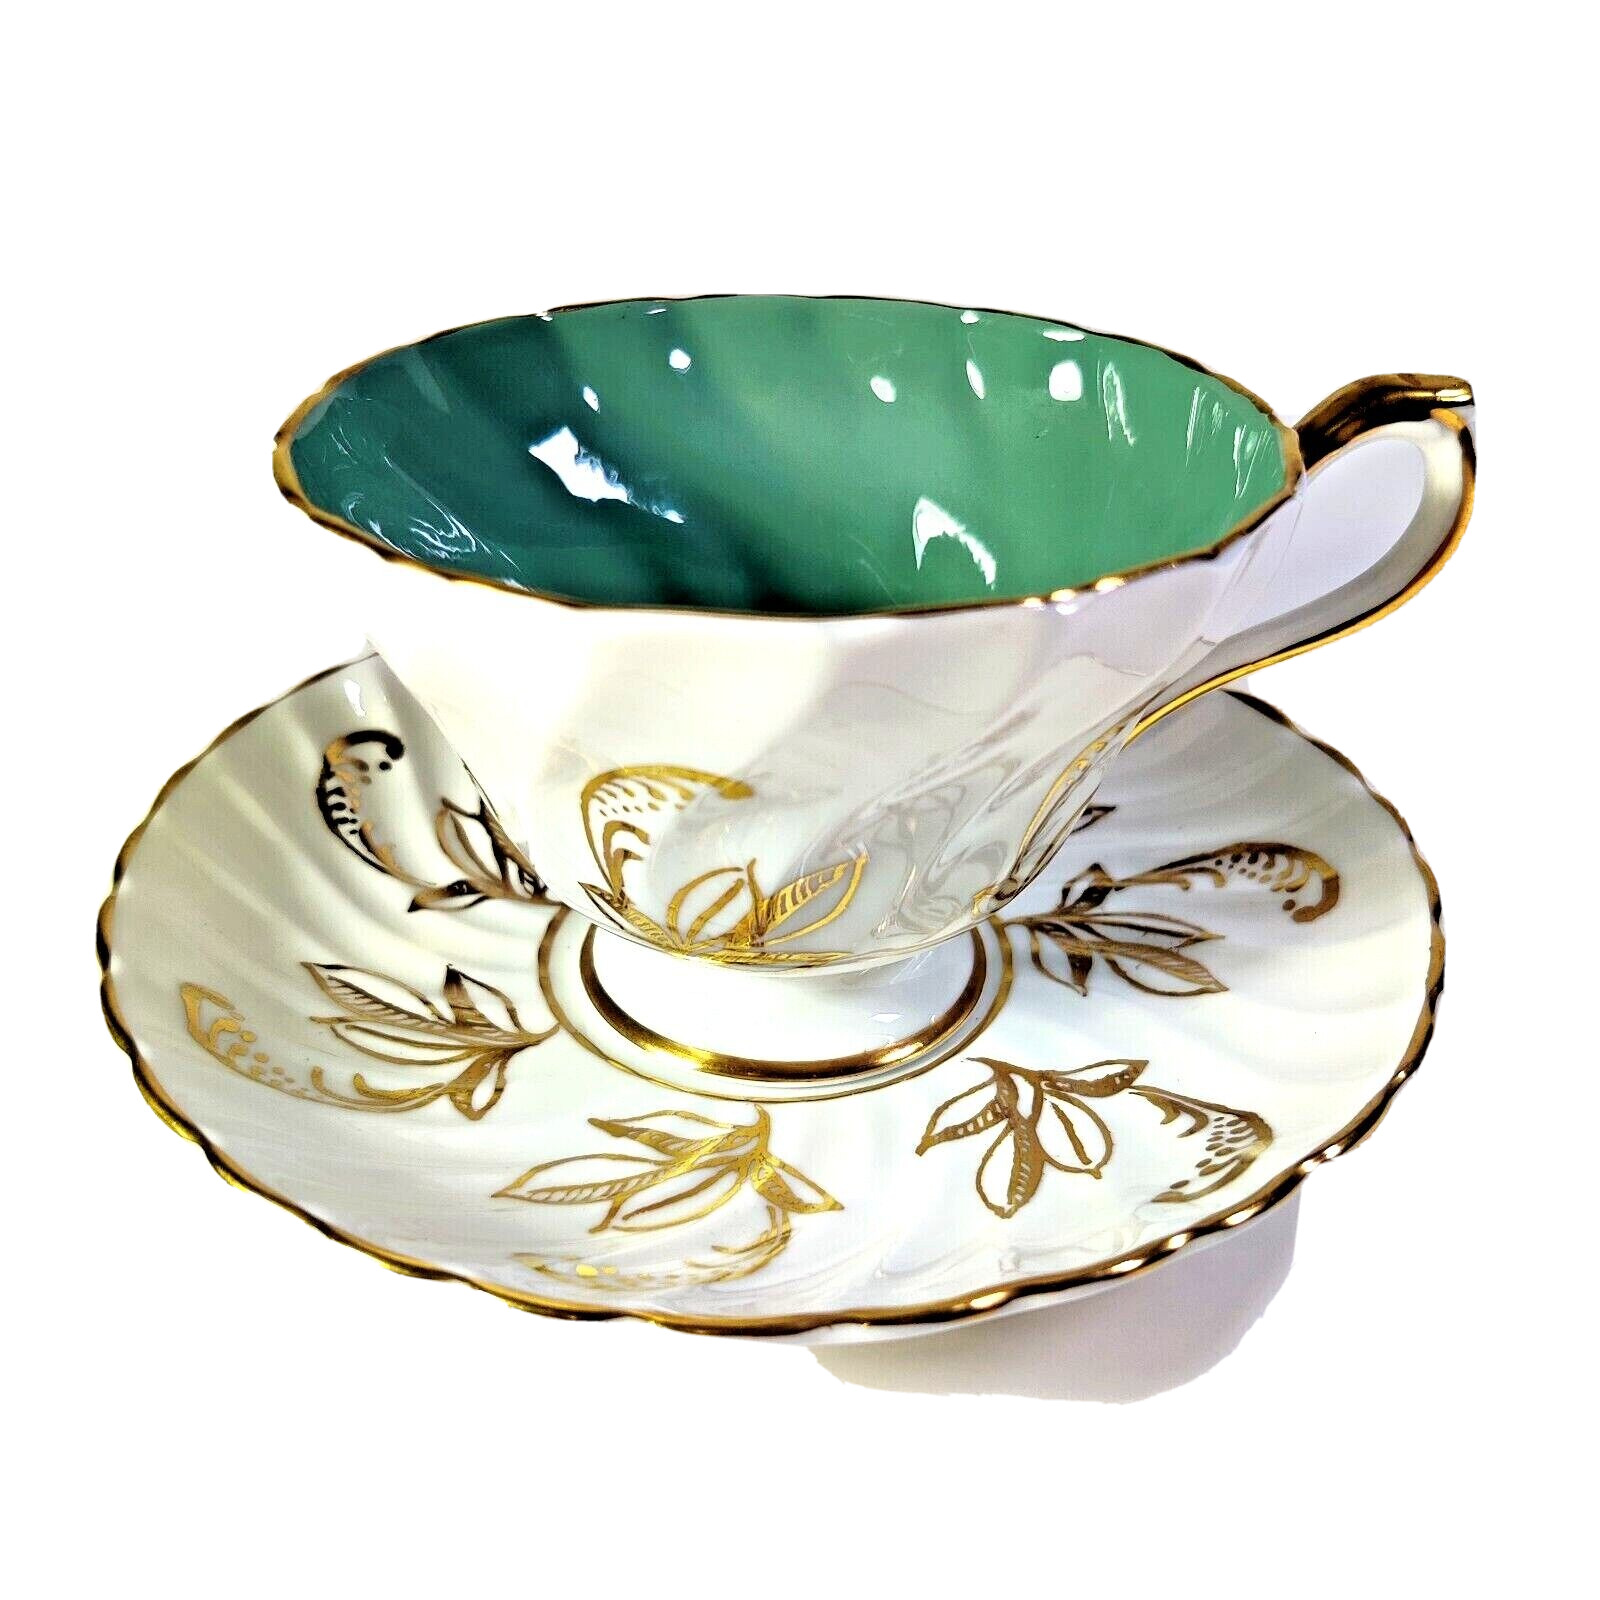 Ansley Tea Cup White Gold Accents Teal Interior Beautiful Gold Swirl Pattern